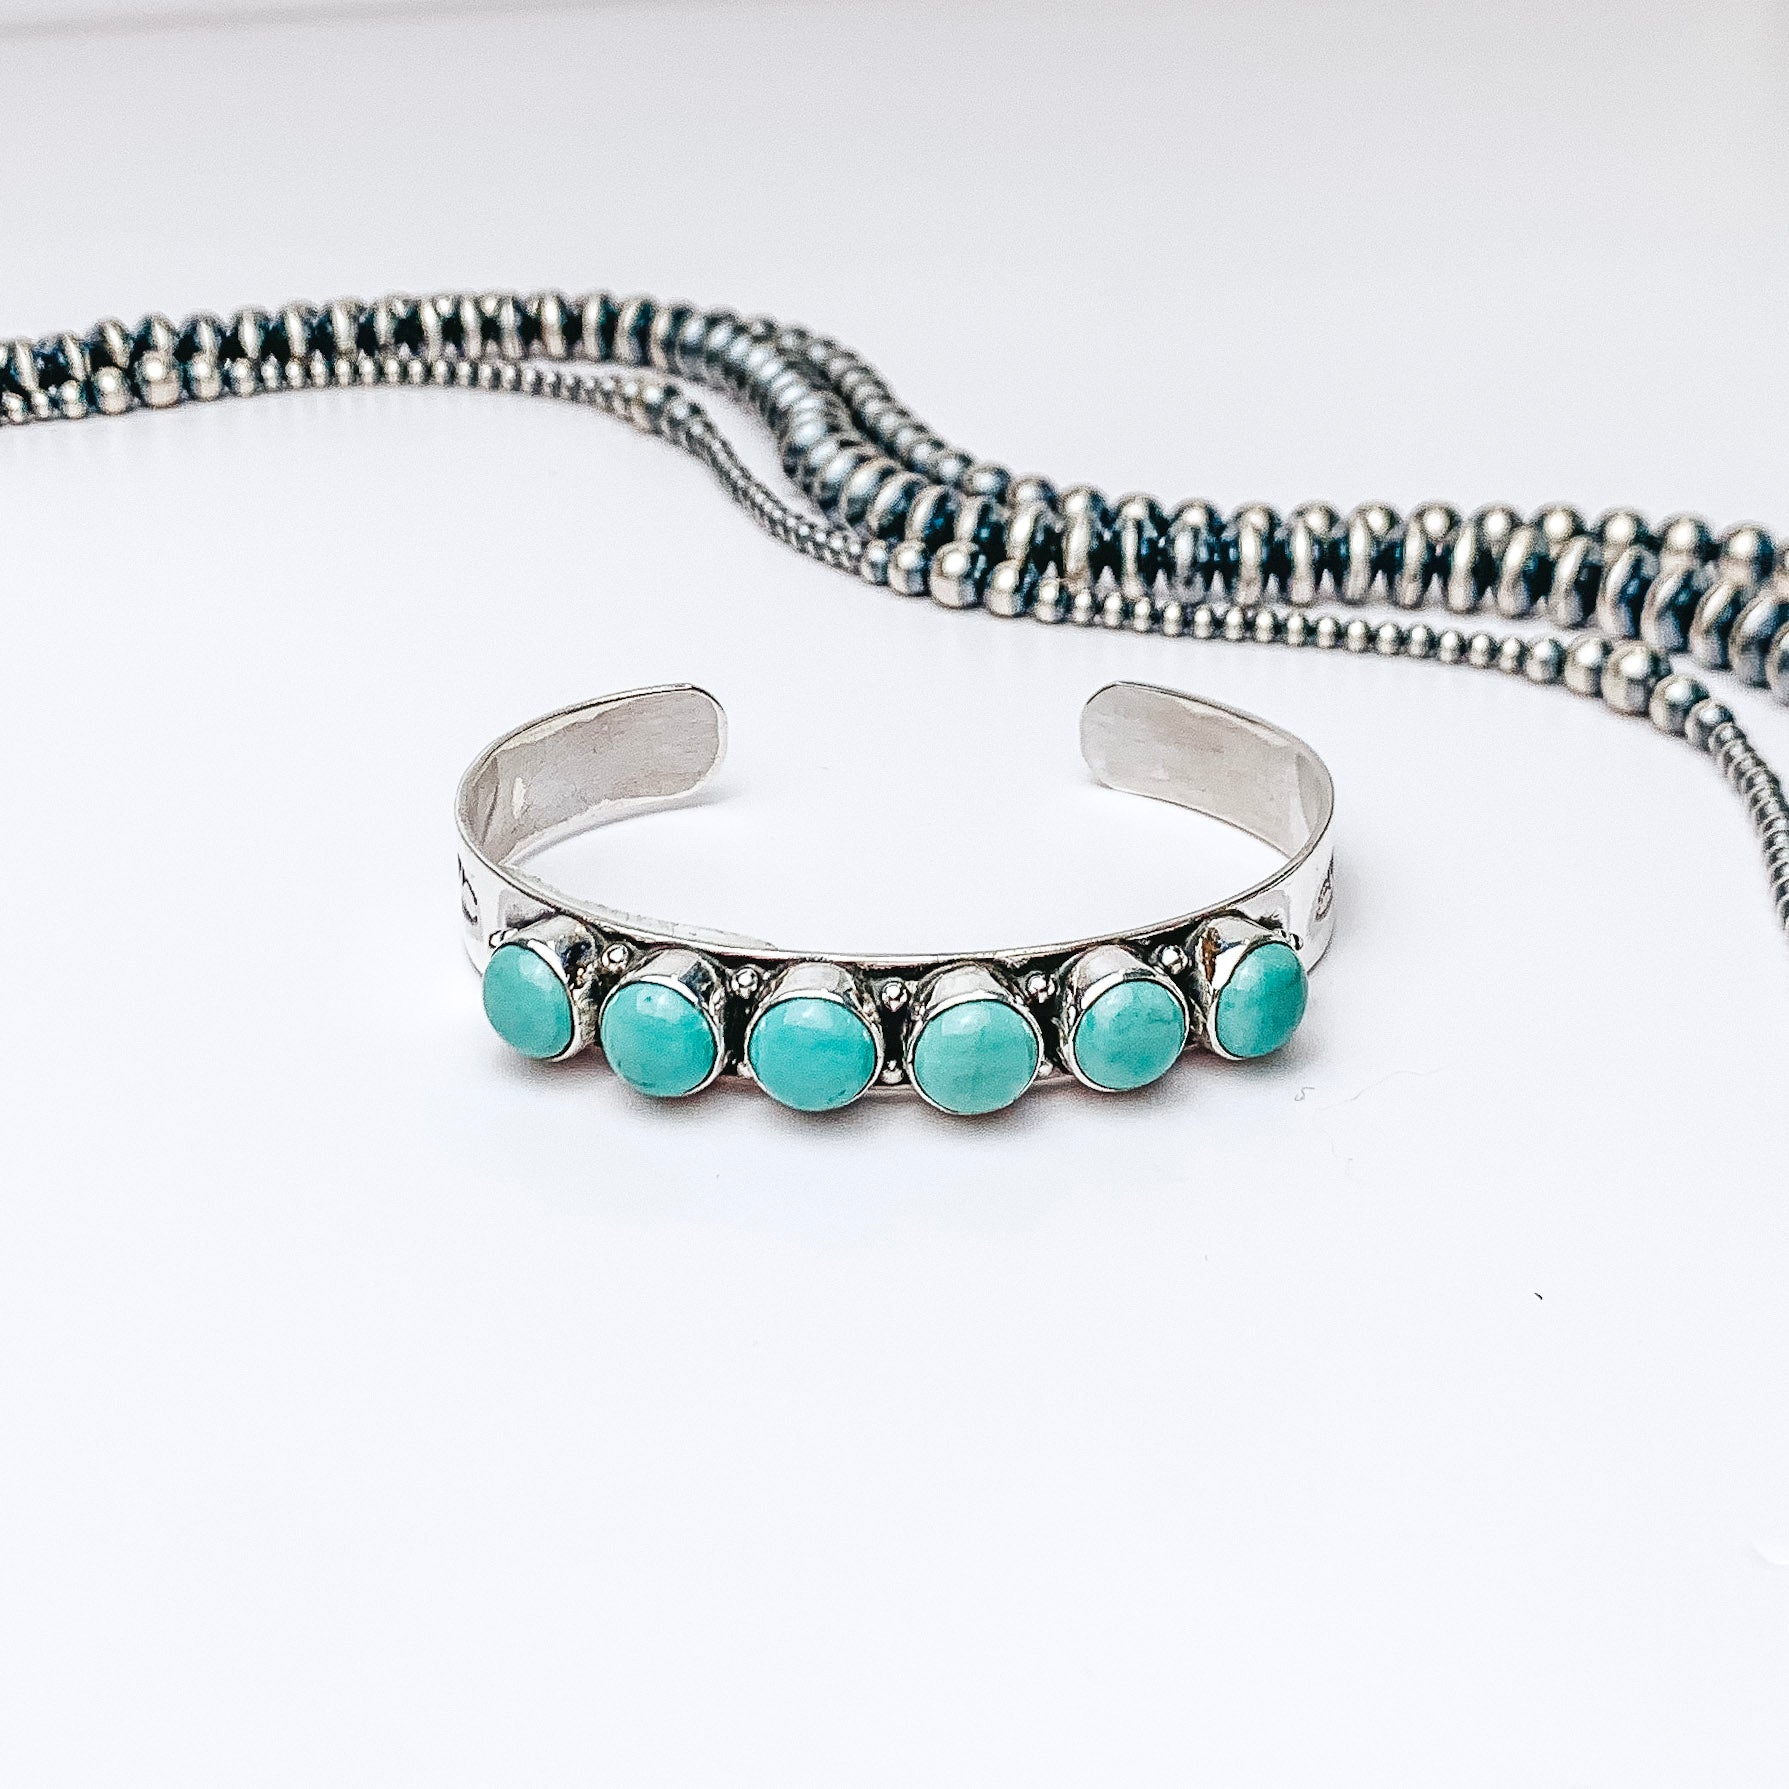 Centered in the picture is a cuff with six kingman turquoise stones. Navajo pearls are laid above the cuff, all on a white background. 